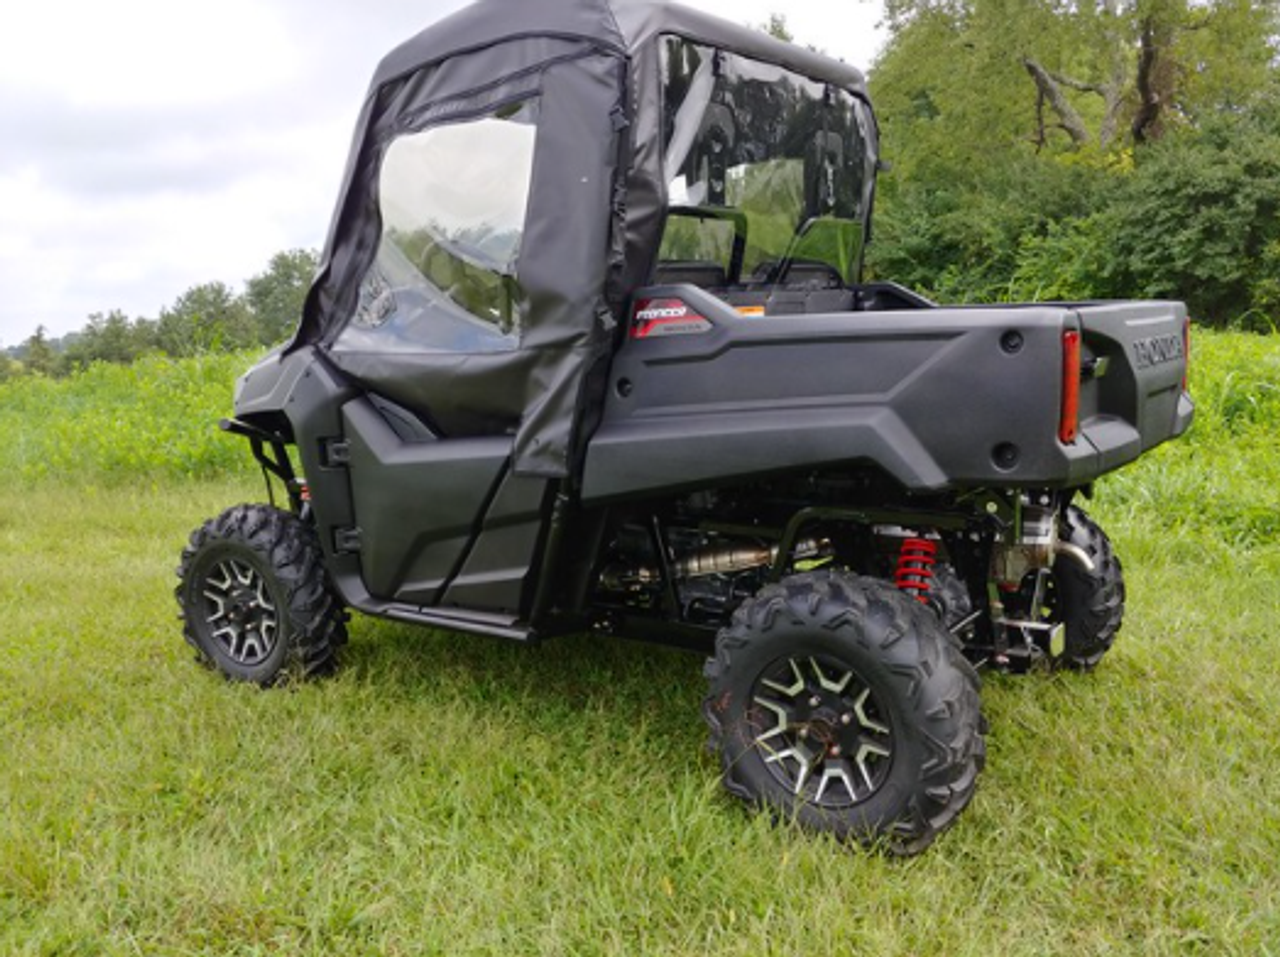 3 Star side x side Honda Pioneer 700 full cab enclosure rear and side angle view